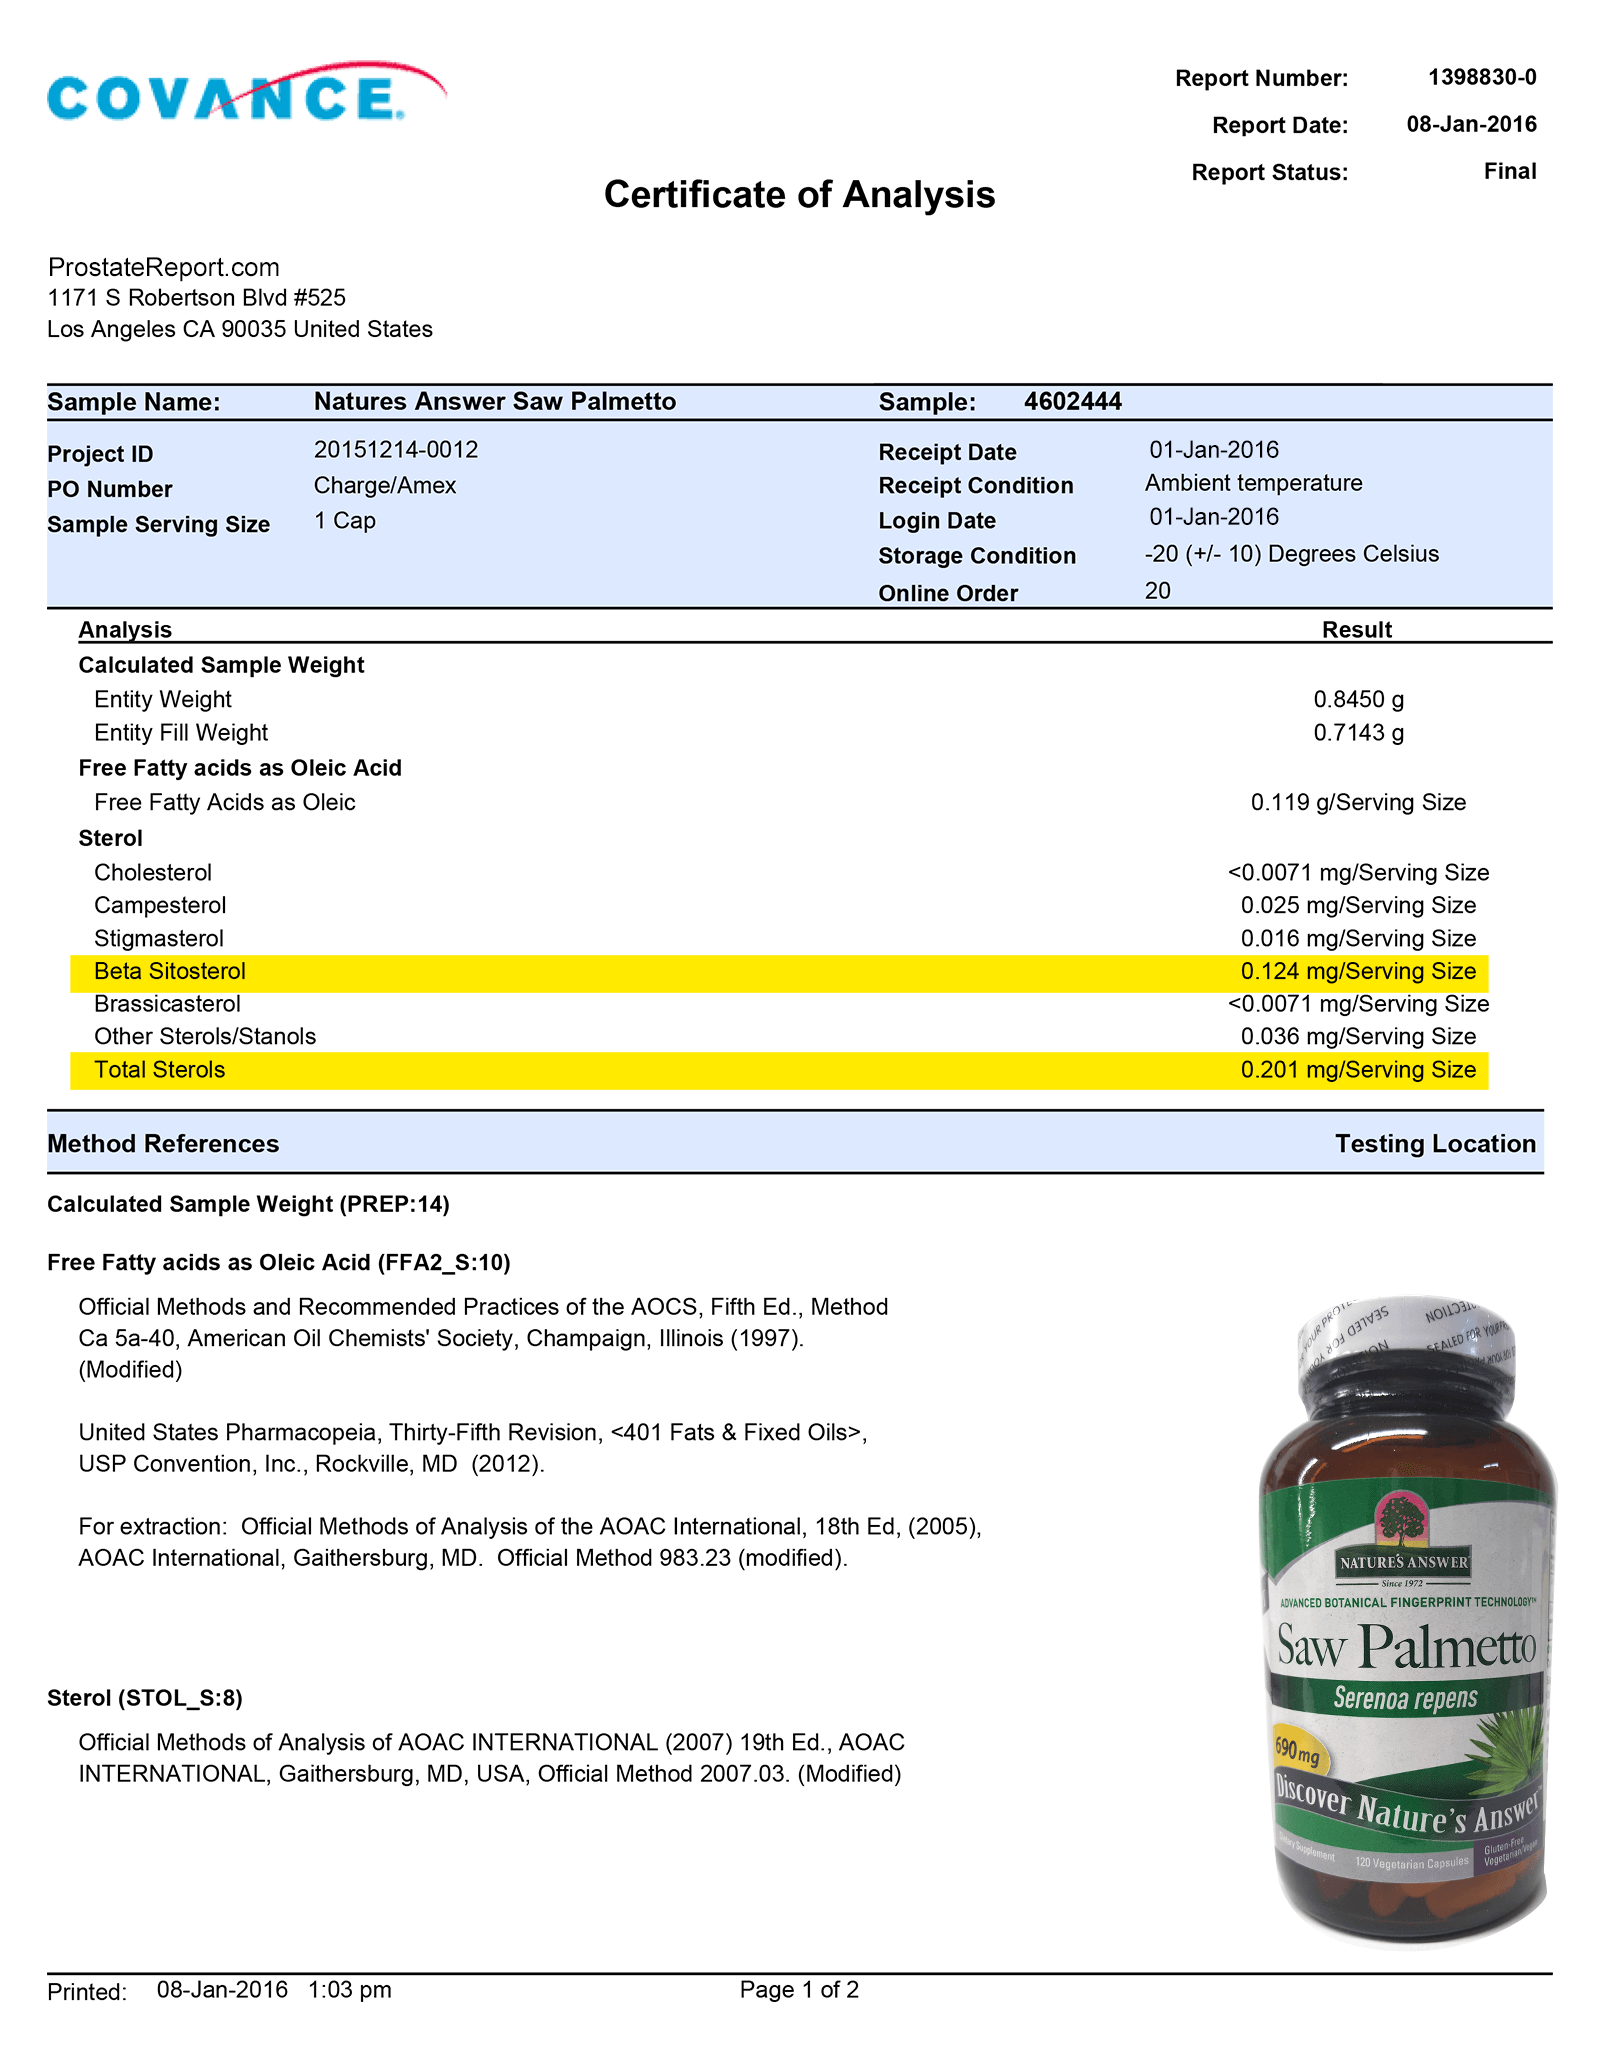 Saw-Palmetto-Natures-Answer lab report 